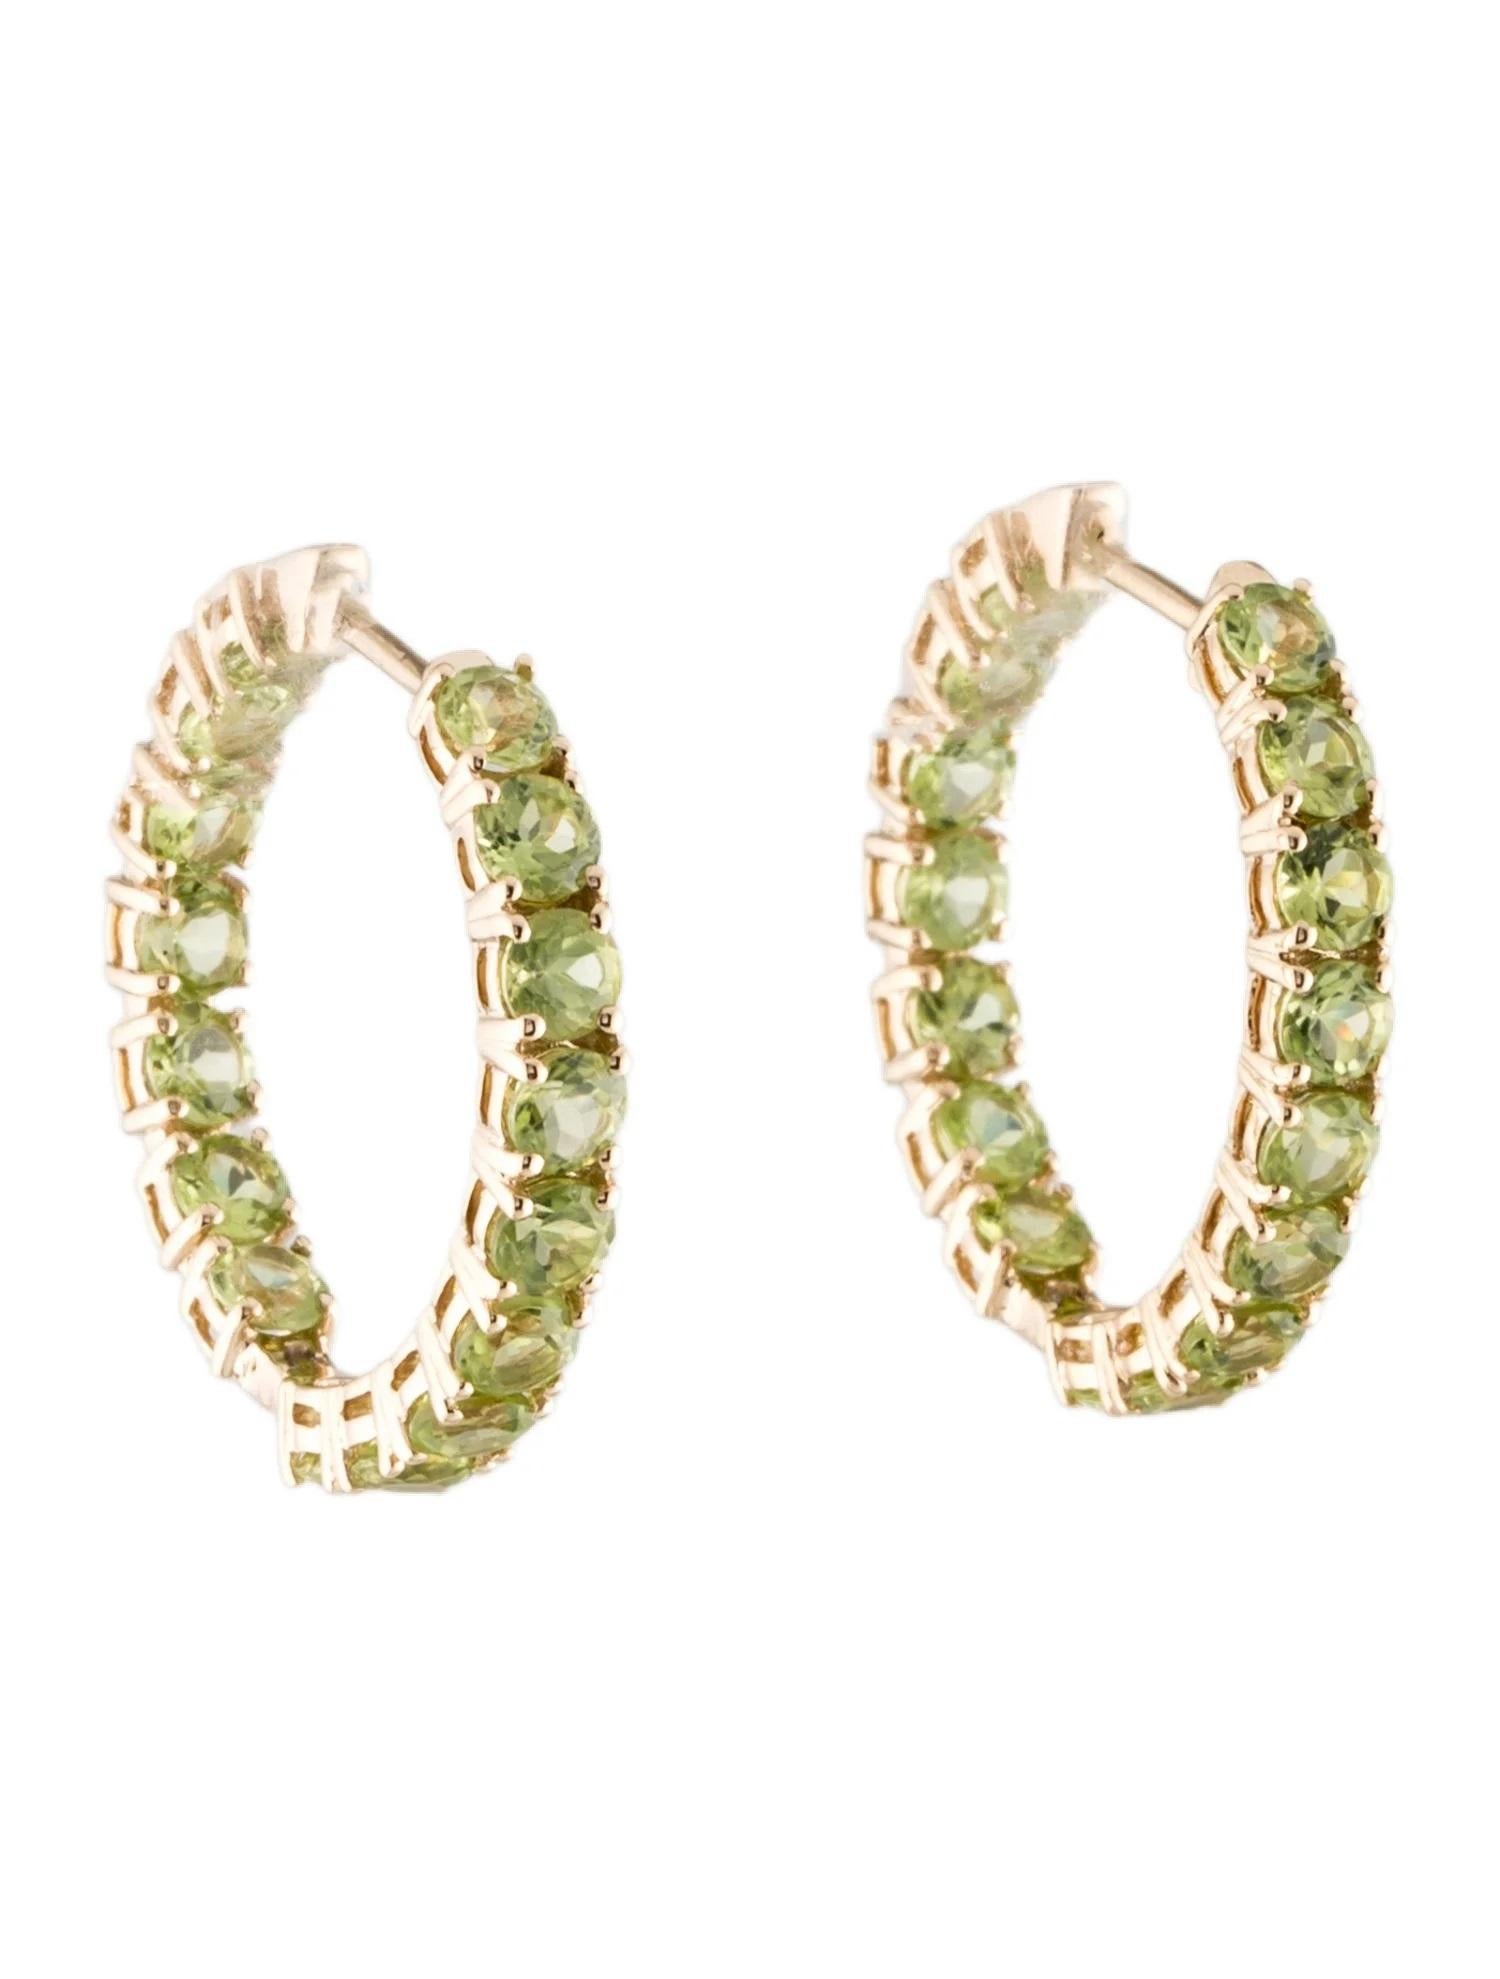 Round Cut 14K 6.53ctw Peridot Inside-Out Hoop Earrings  Round Faceted Gemstones  Green For Sale